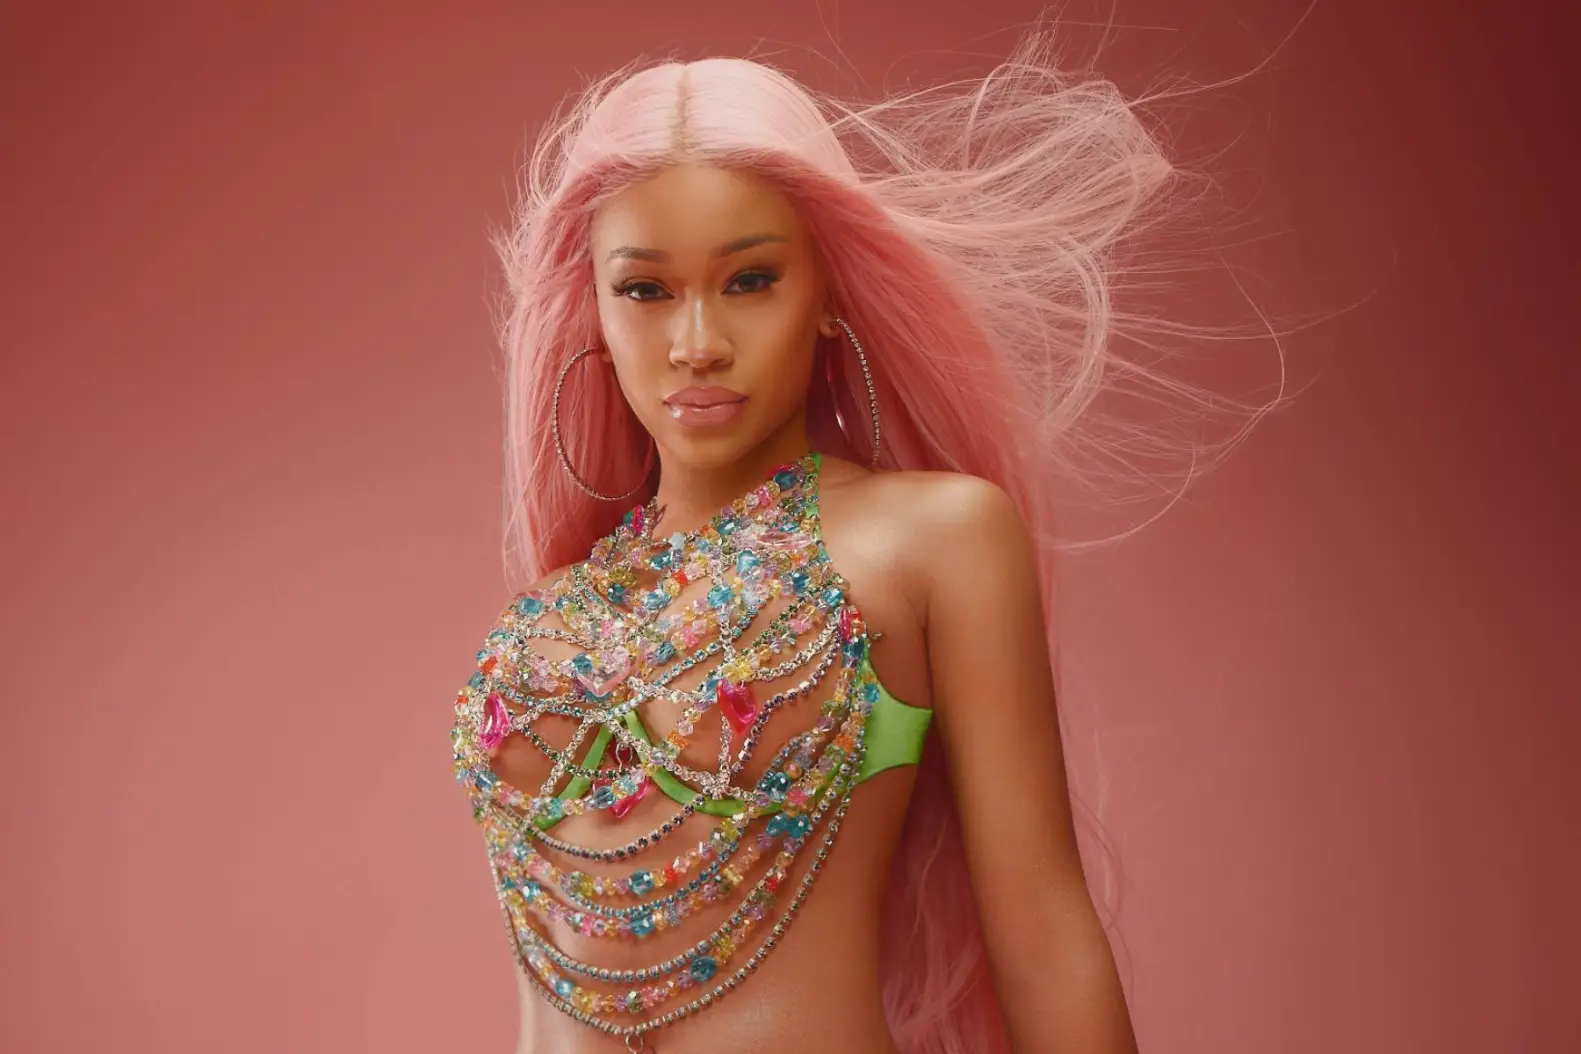 Saweetie’s ‘Nani’: How The Song Is Inspired By Lady Gaga, Explained